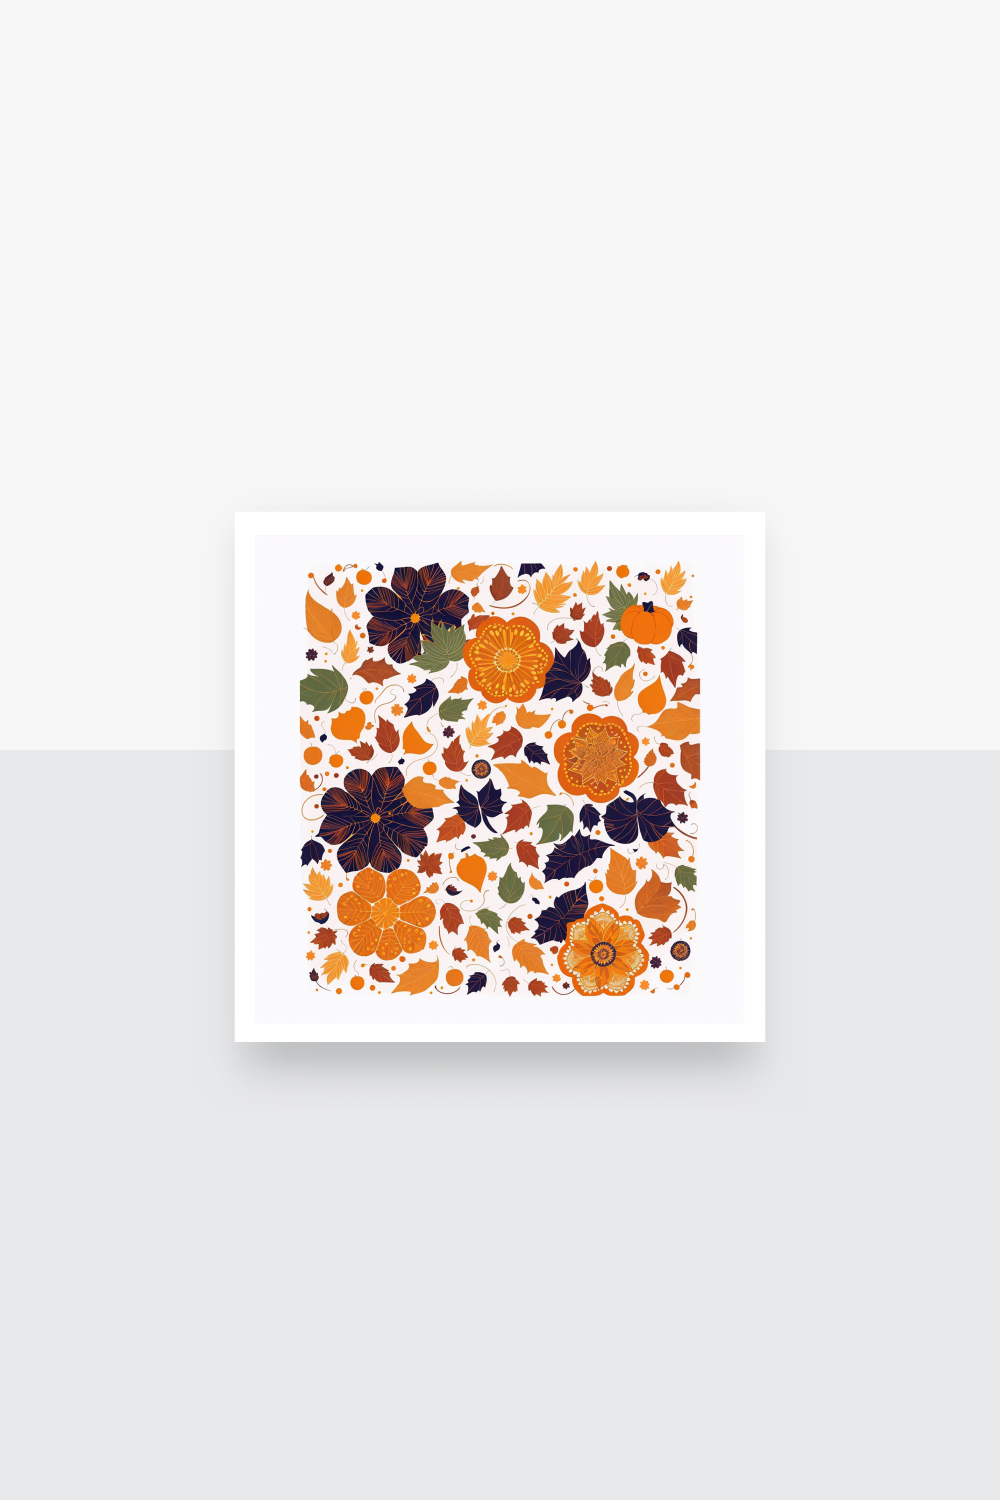 Seamless pattern of autumn fruits pinterest preview image.